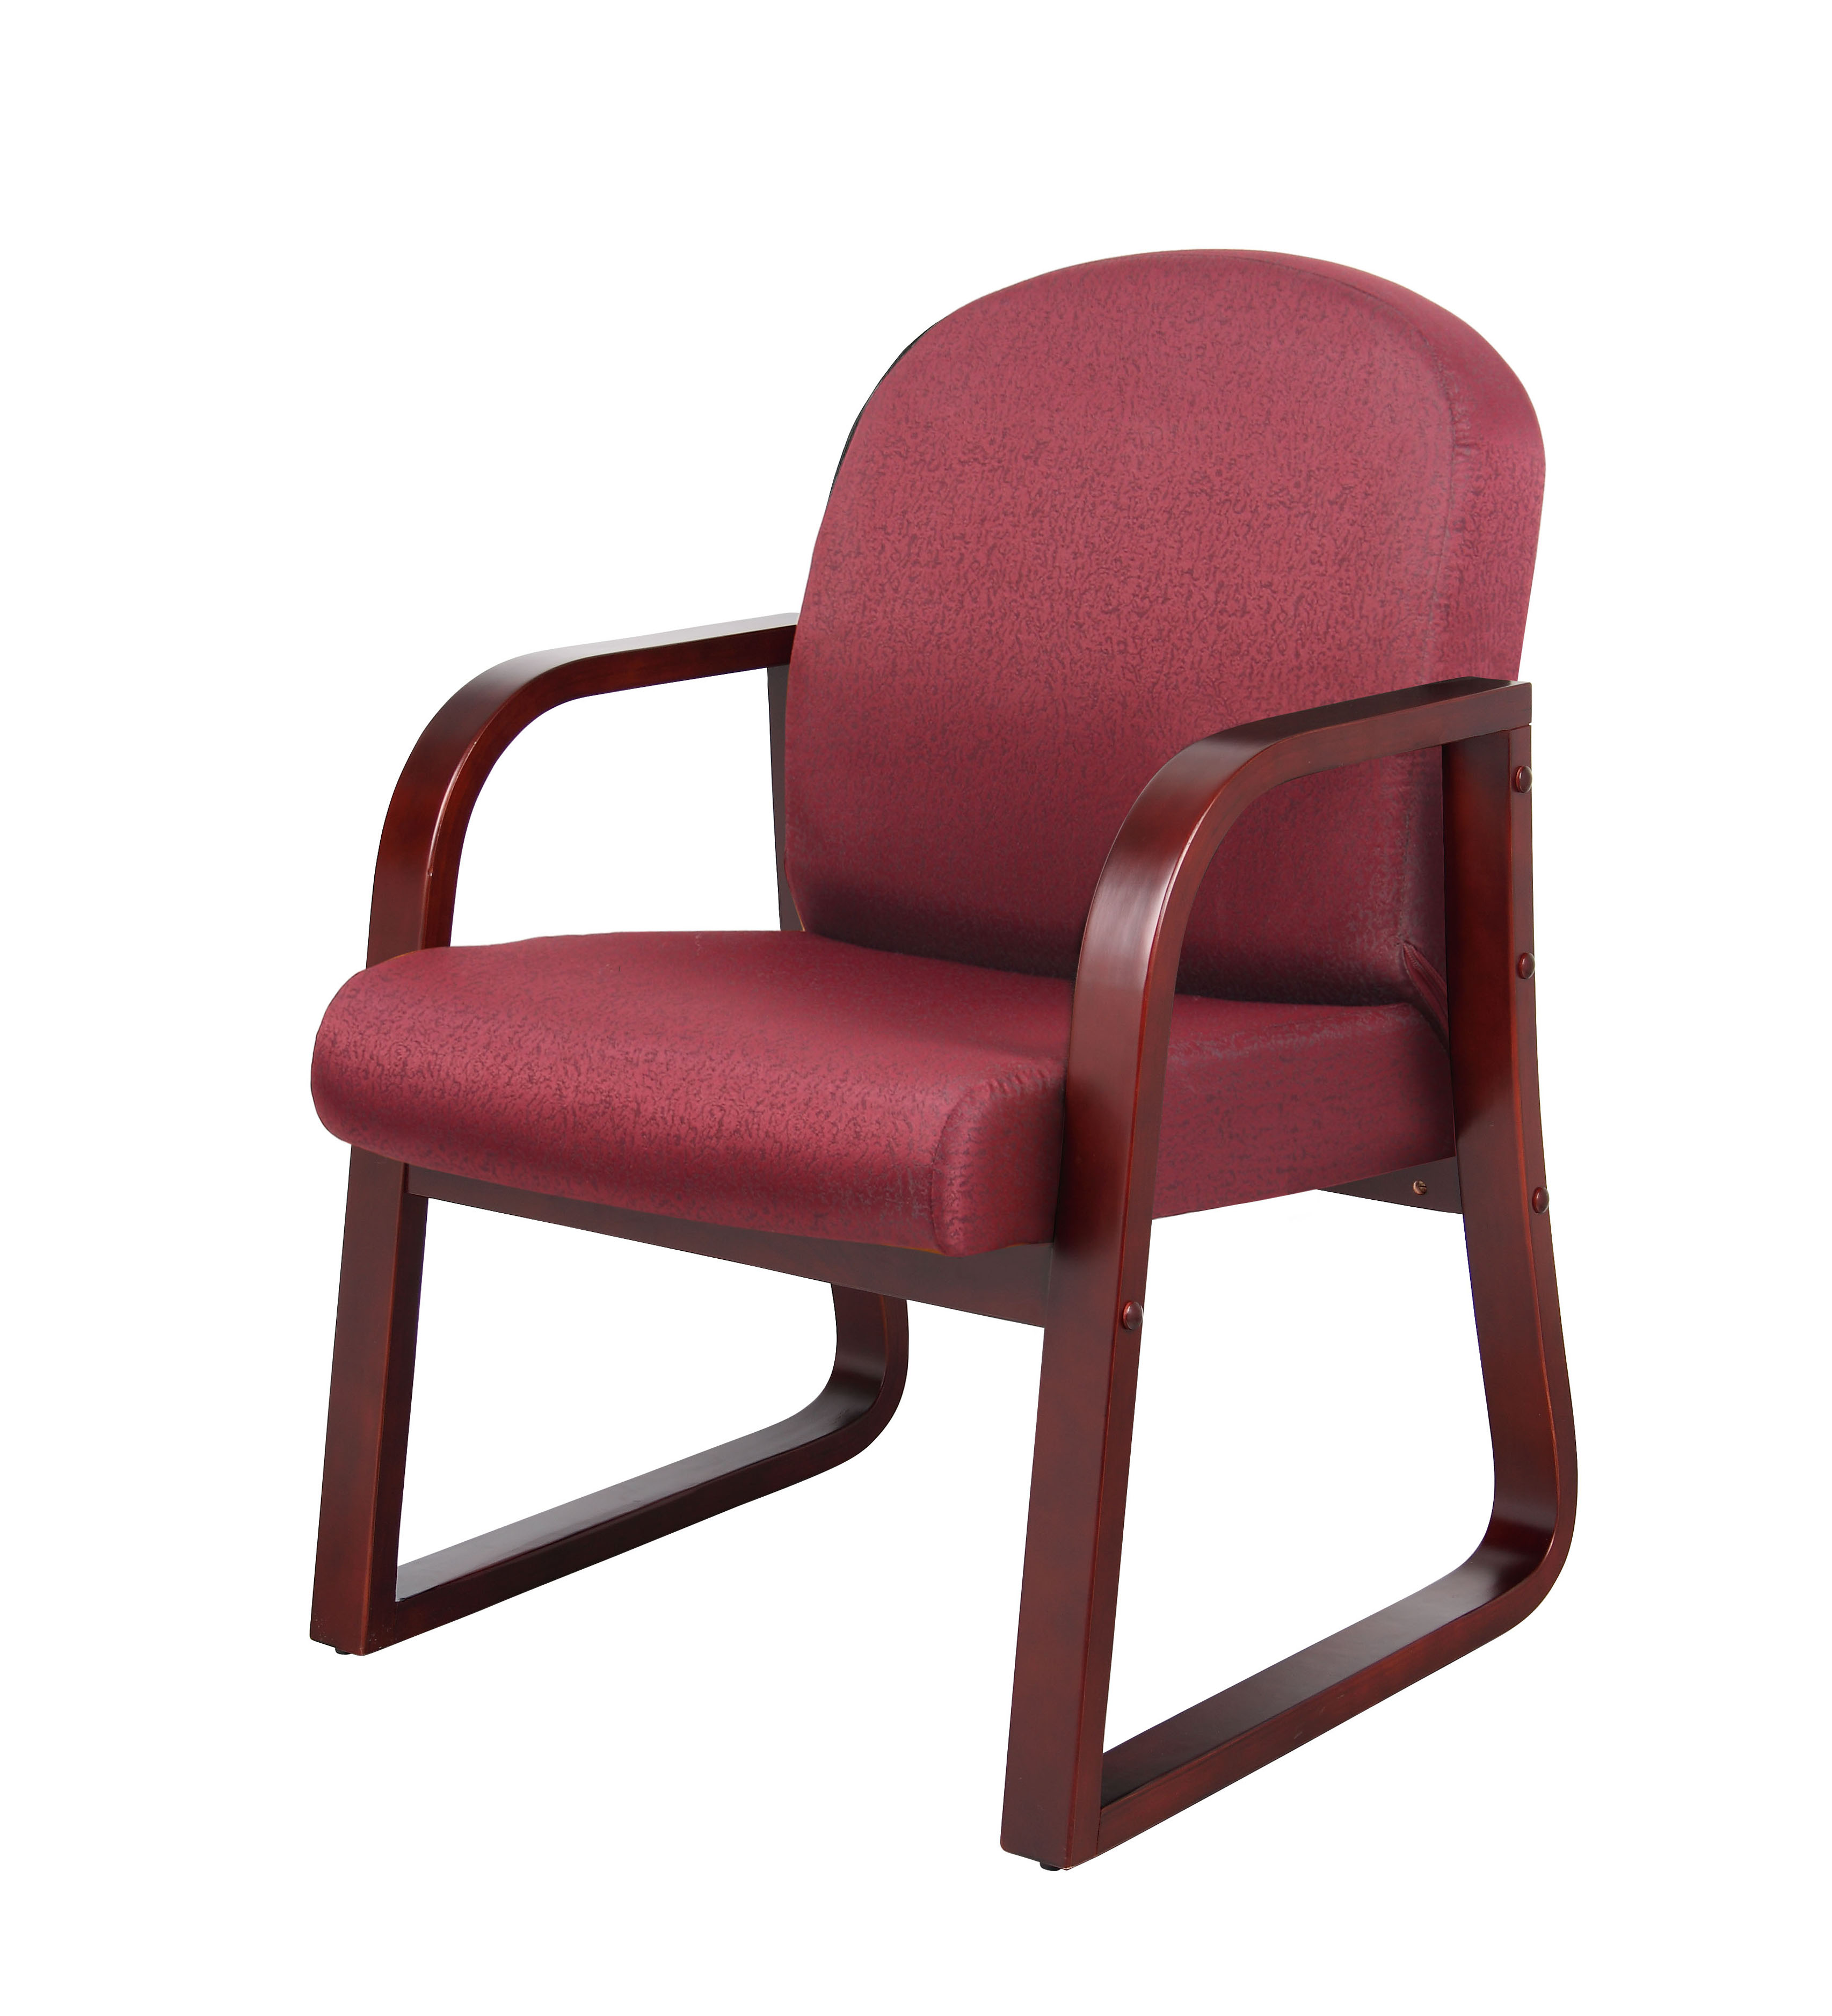 Mahogany Frame Side Guest Office Chair with Burgundy Upholstery 